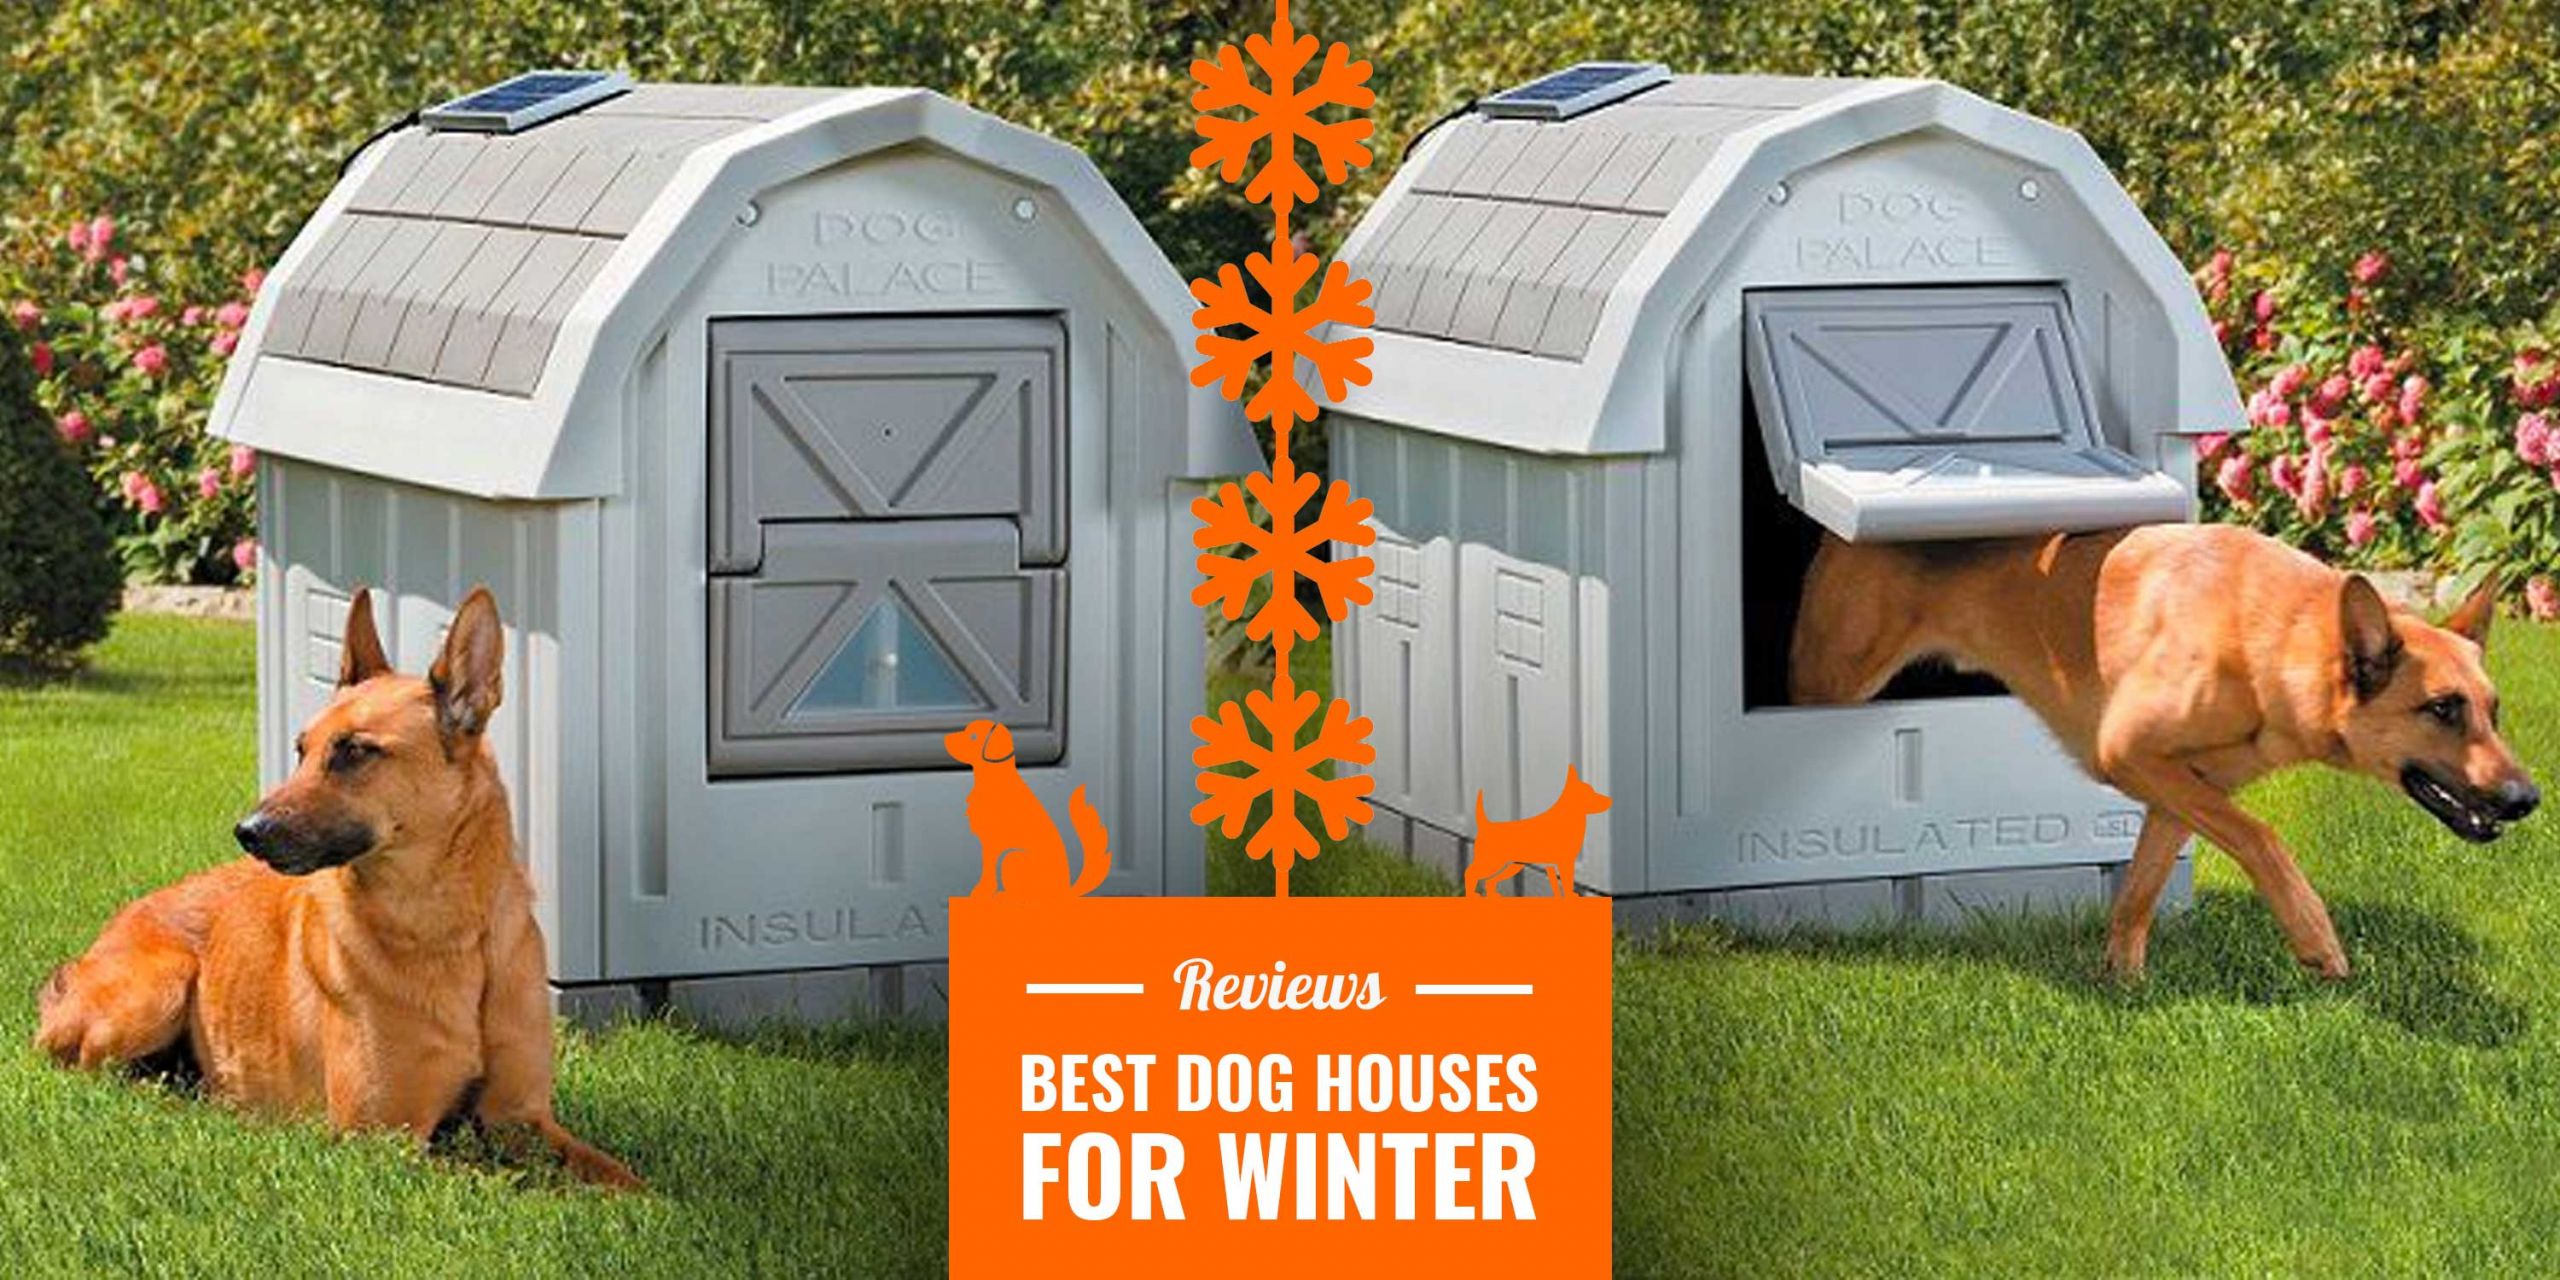 Insulated Dog House DIY
 10 Best Dog Houses for Winter — Reviews Insulation Tips